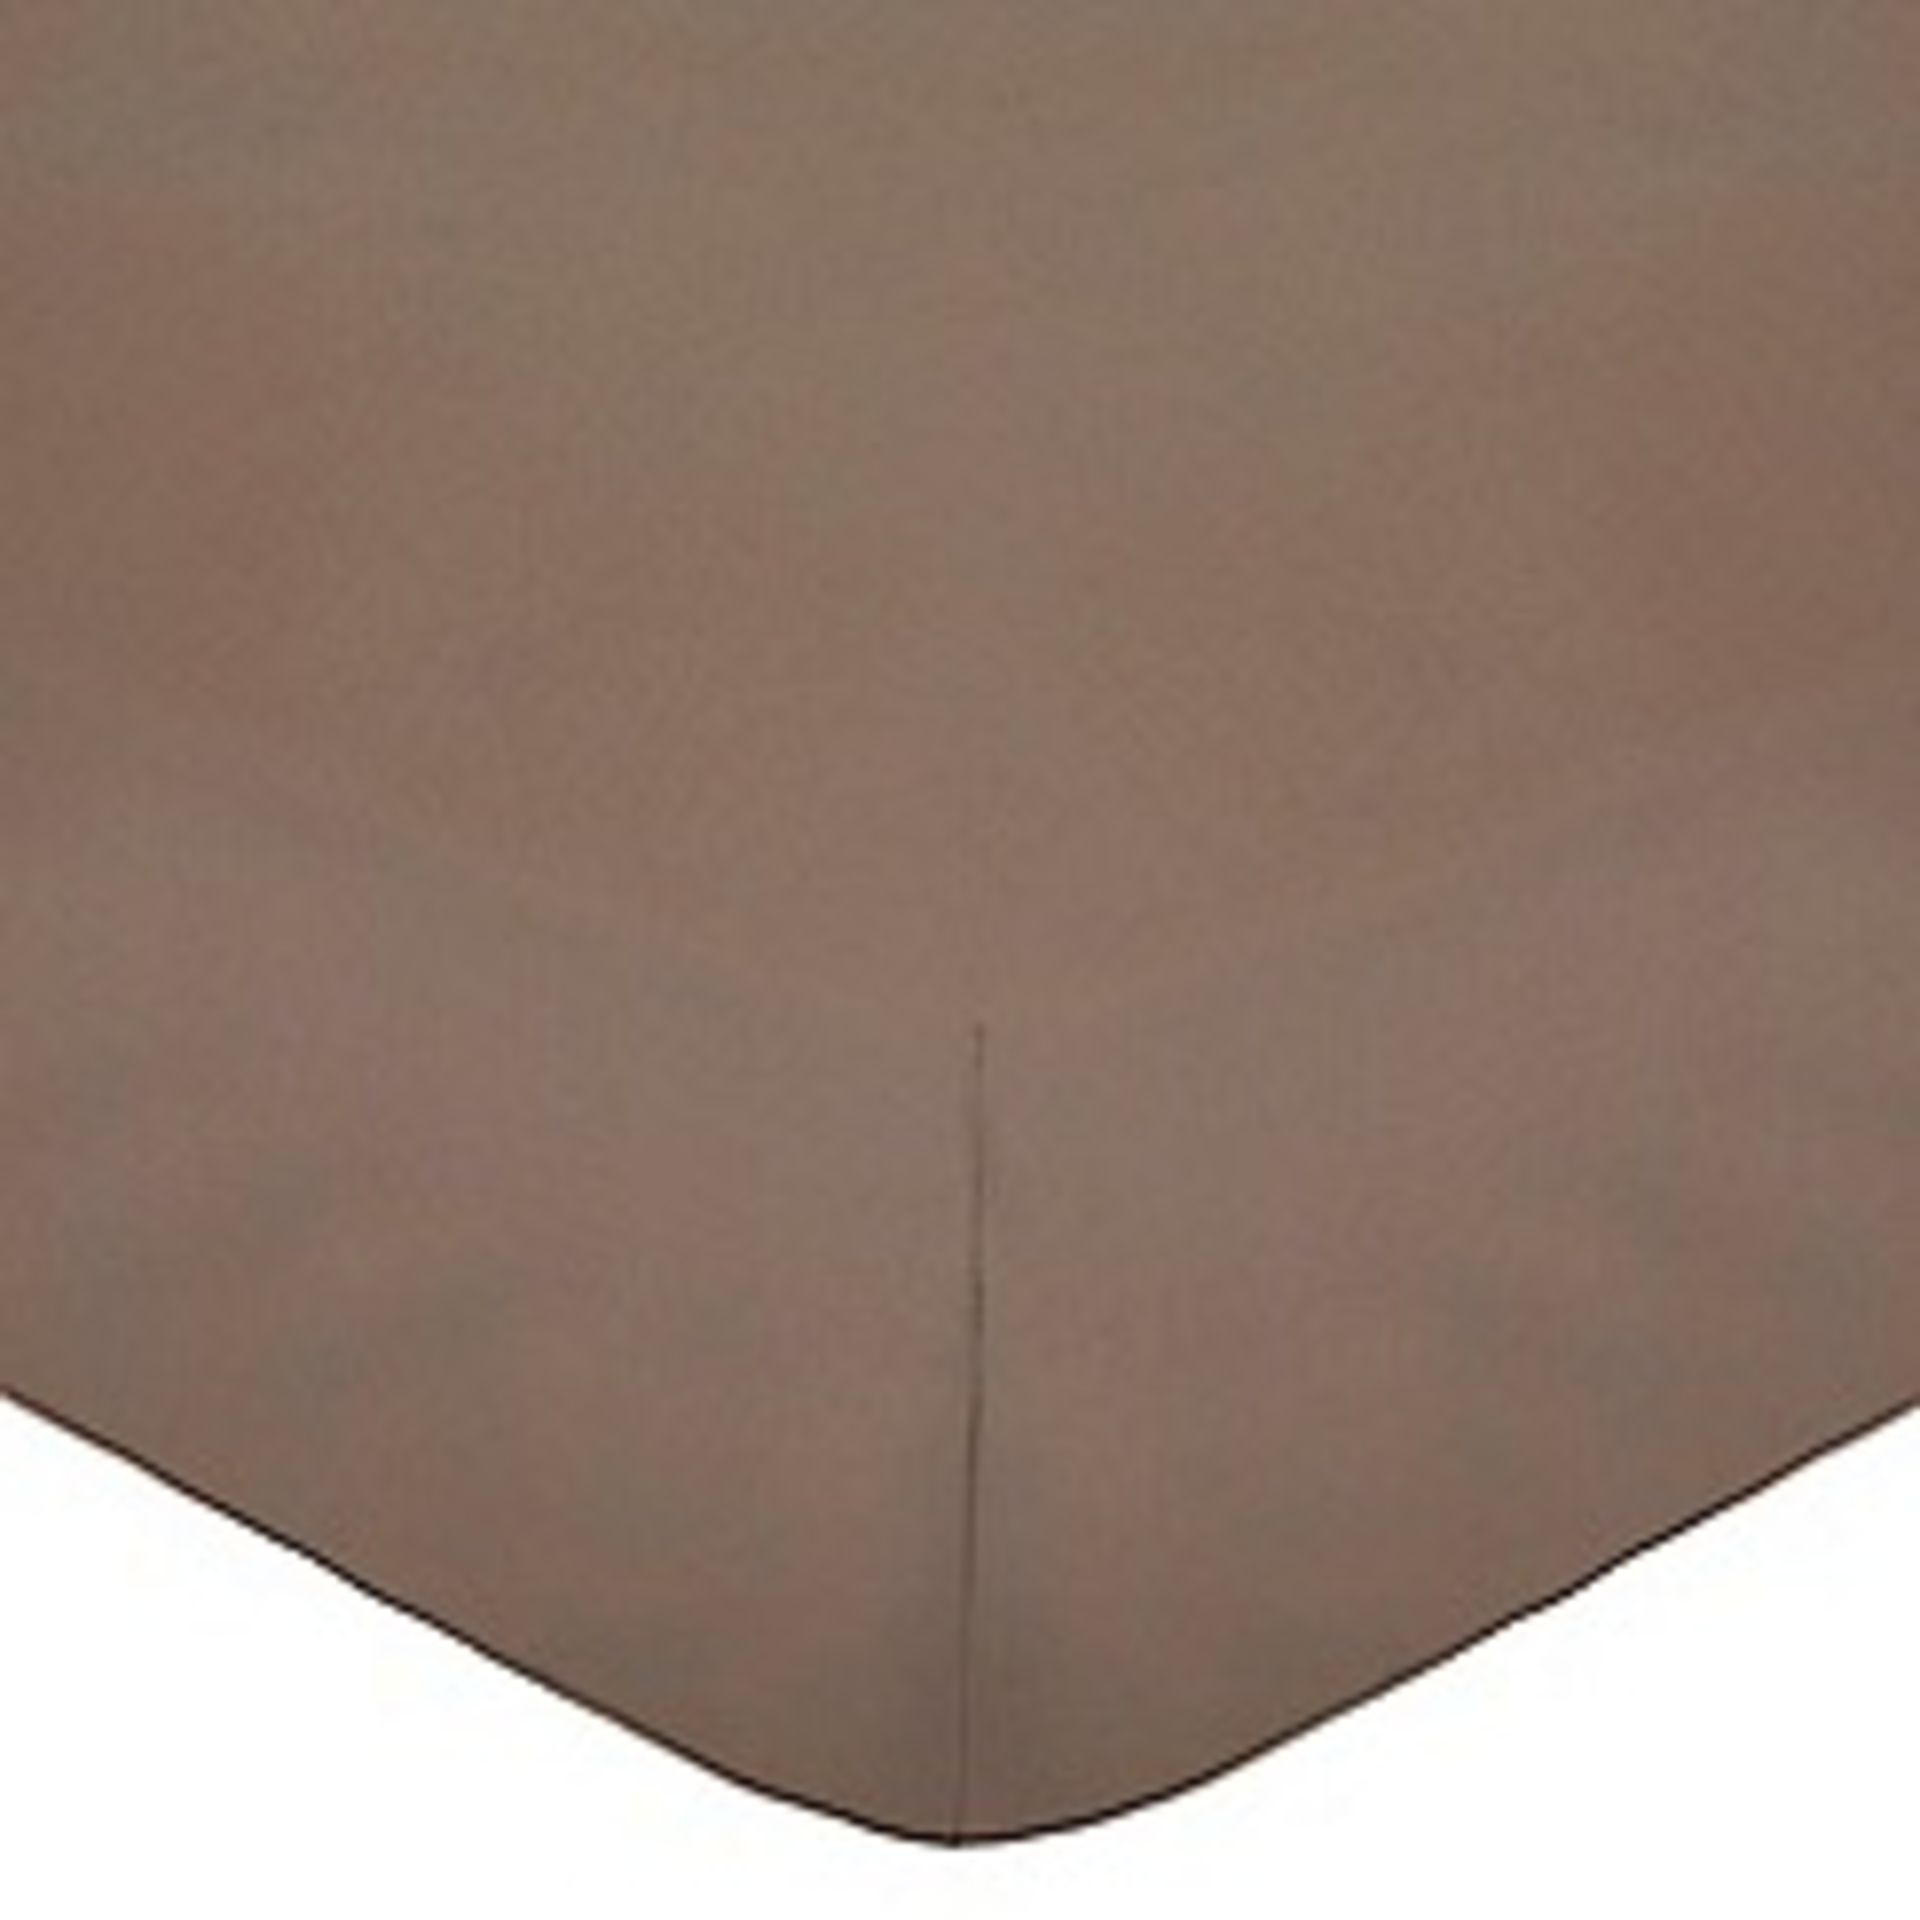 V *TRADE QTY* Brand New Luxury Egyptian Double Fitted Sheet - Biscuit X 5 YOUR BID PRICE TO BE